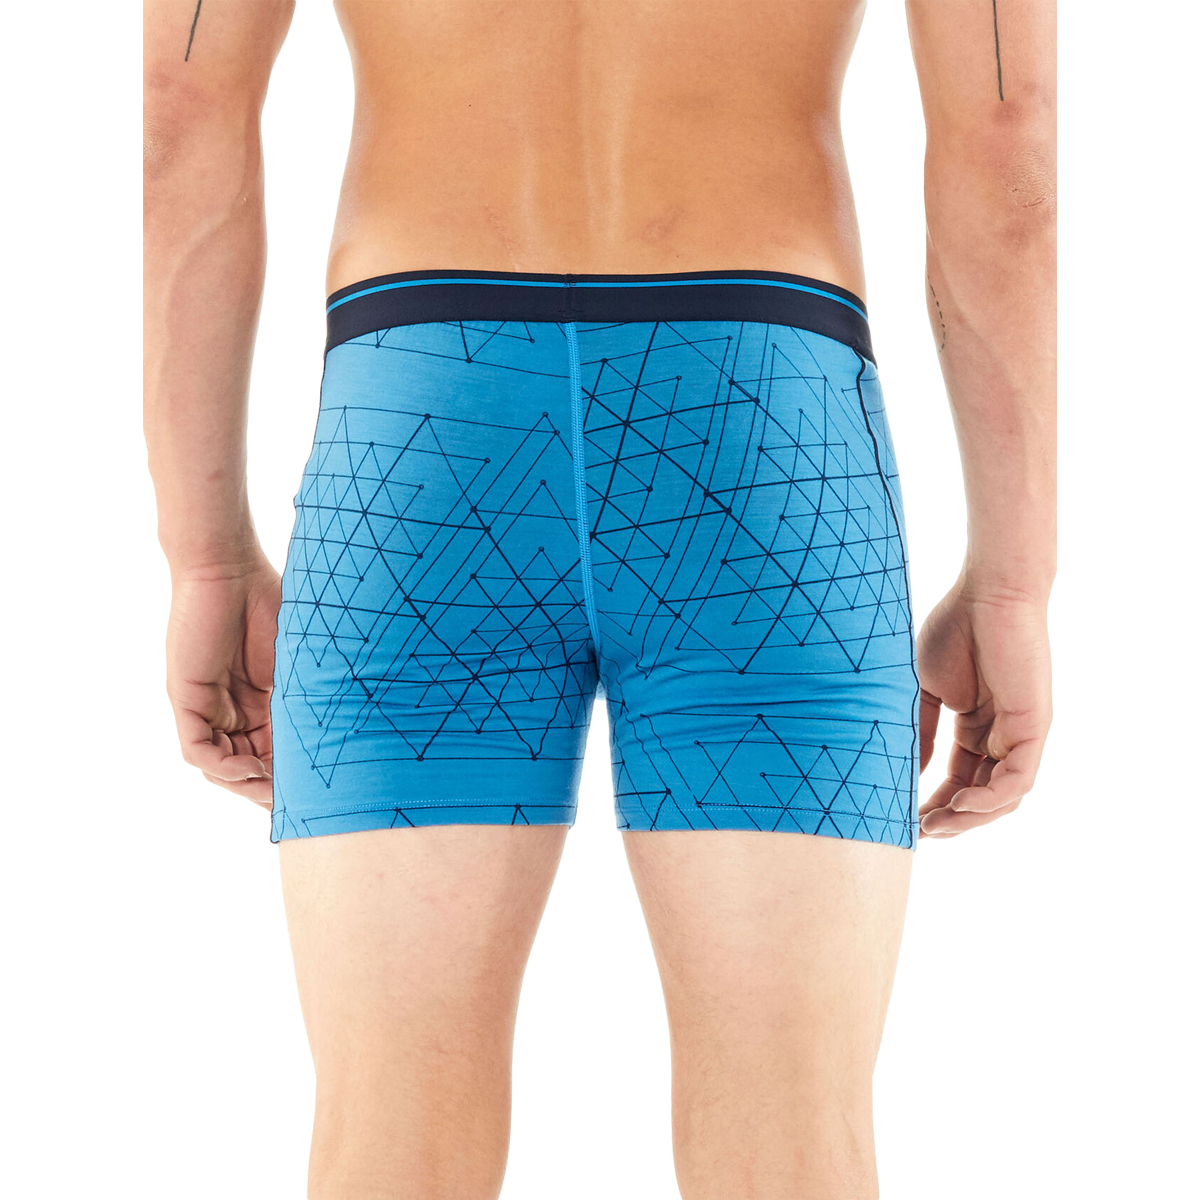 Men's Anatomica Boxers w/ Fly alternate view